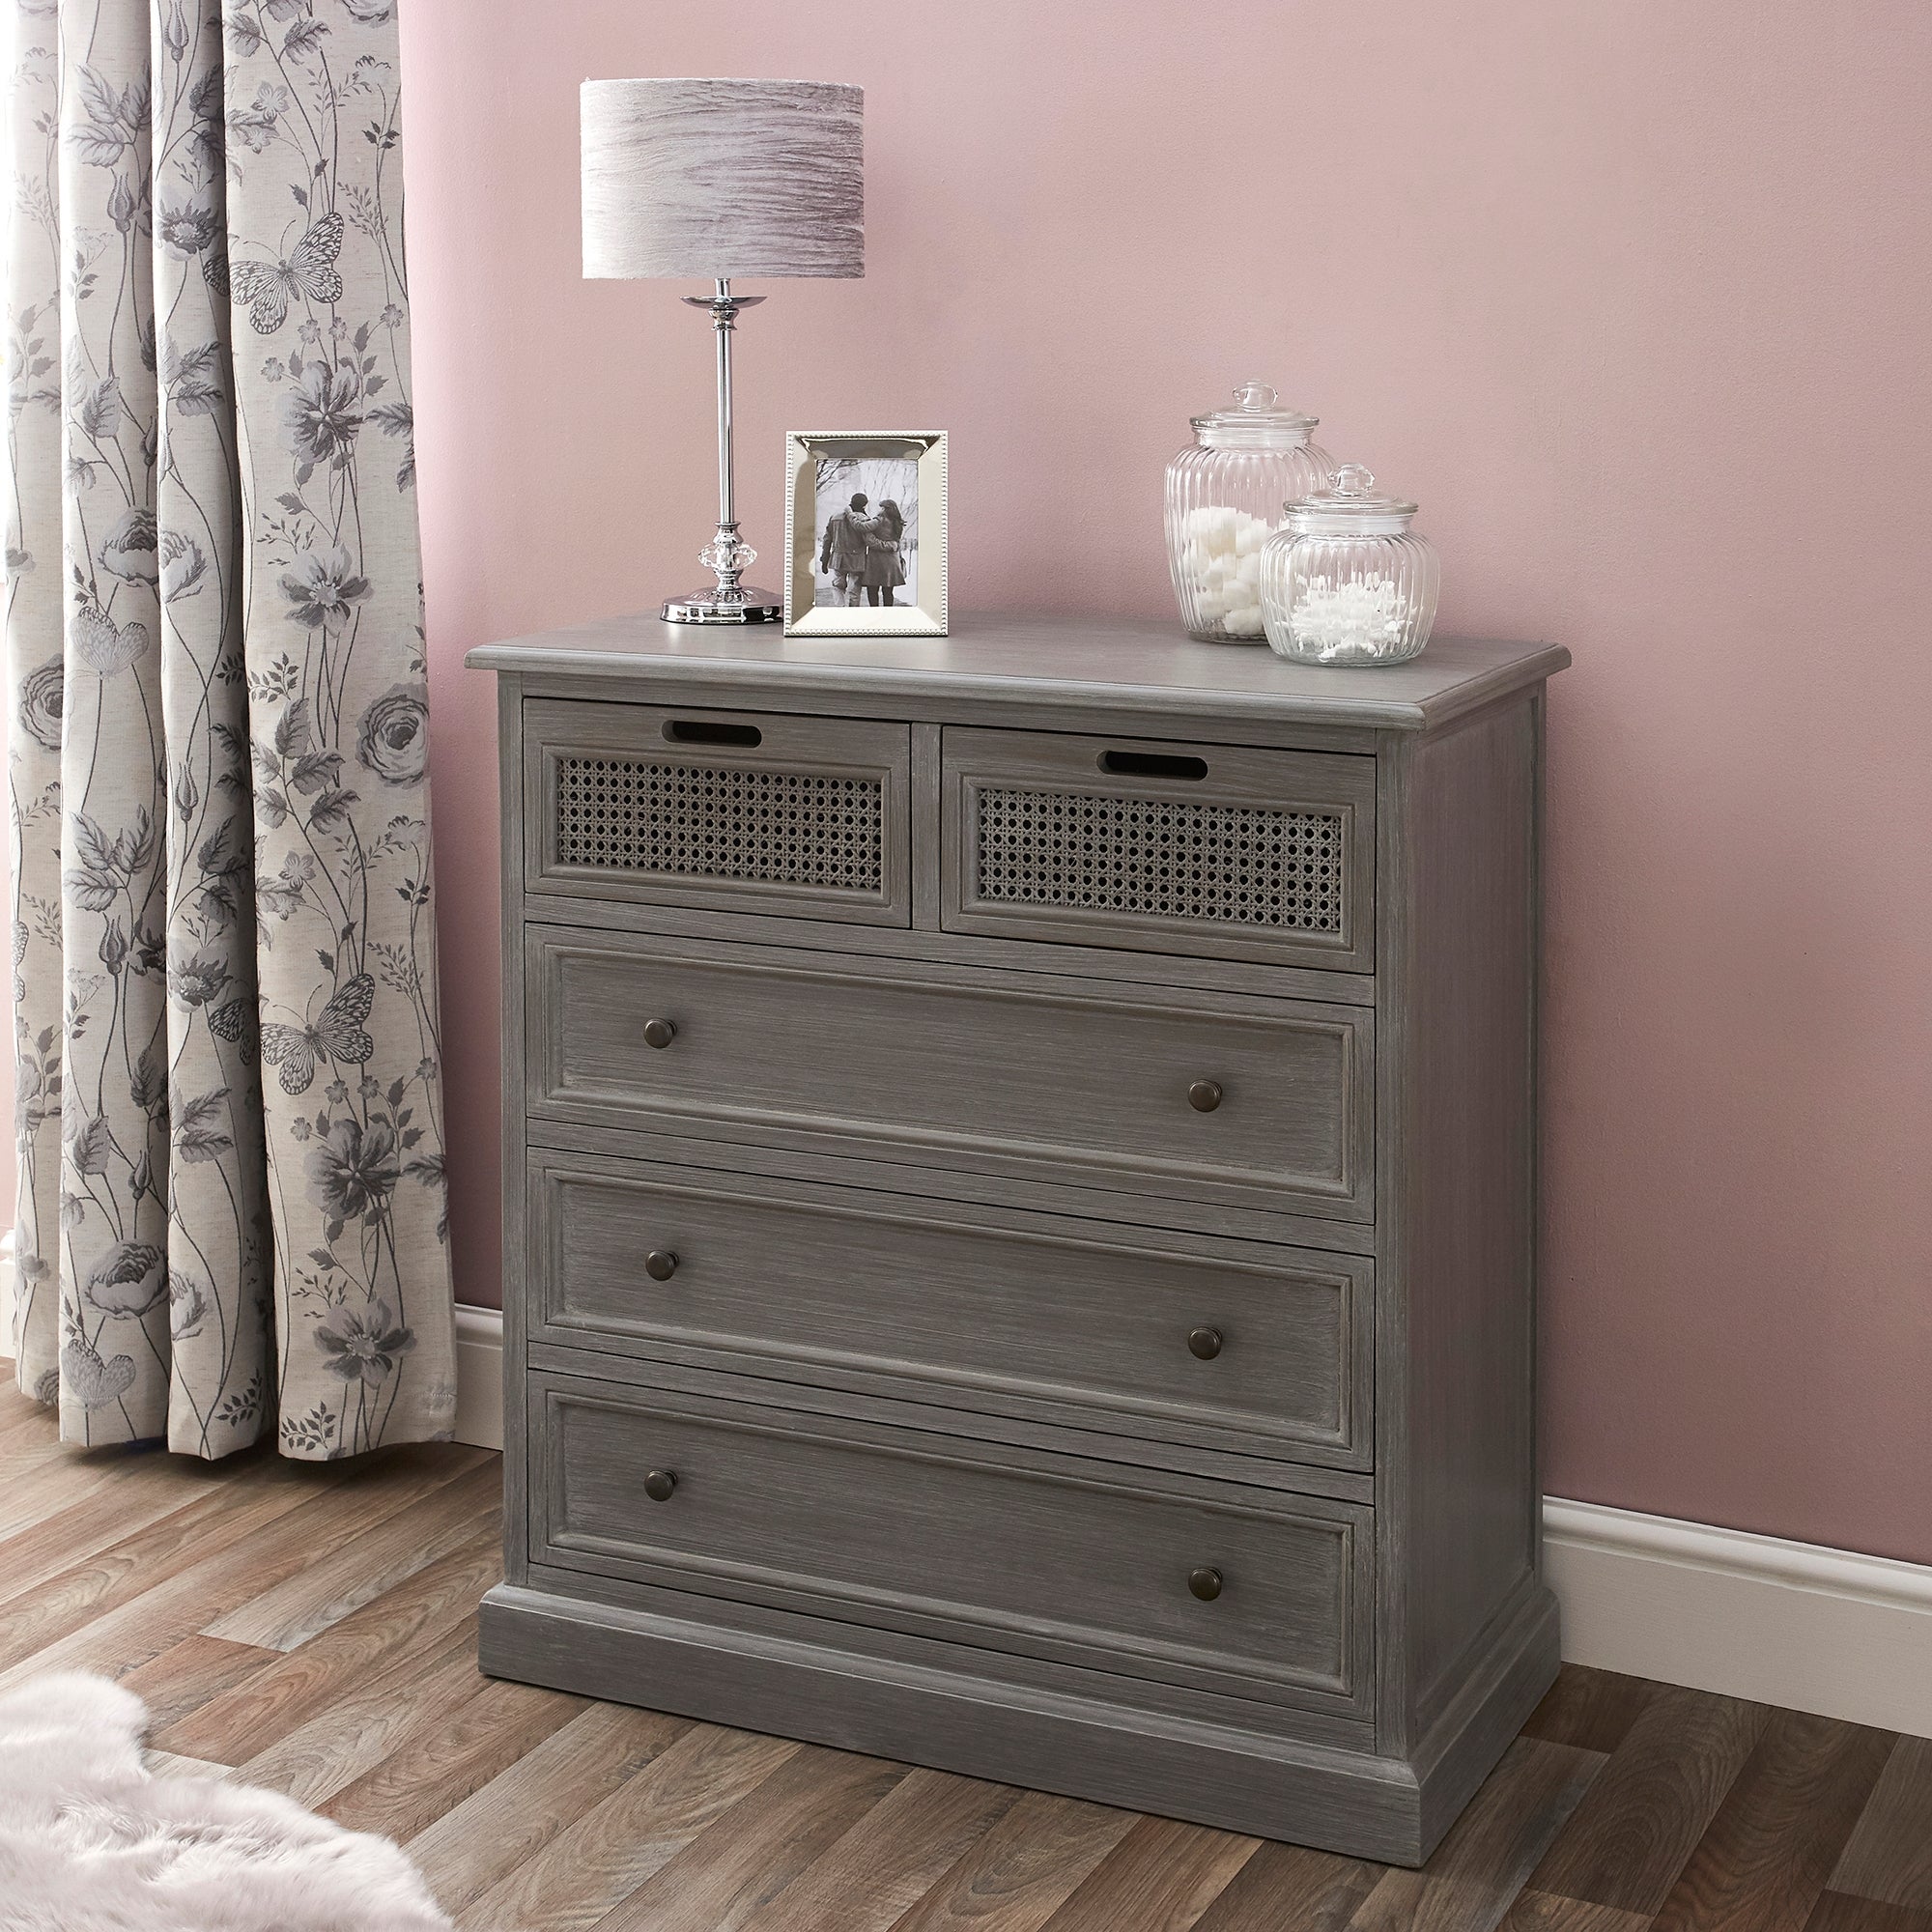 Lucy Cane 5 Drawer Chest Slate Grey